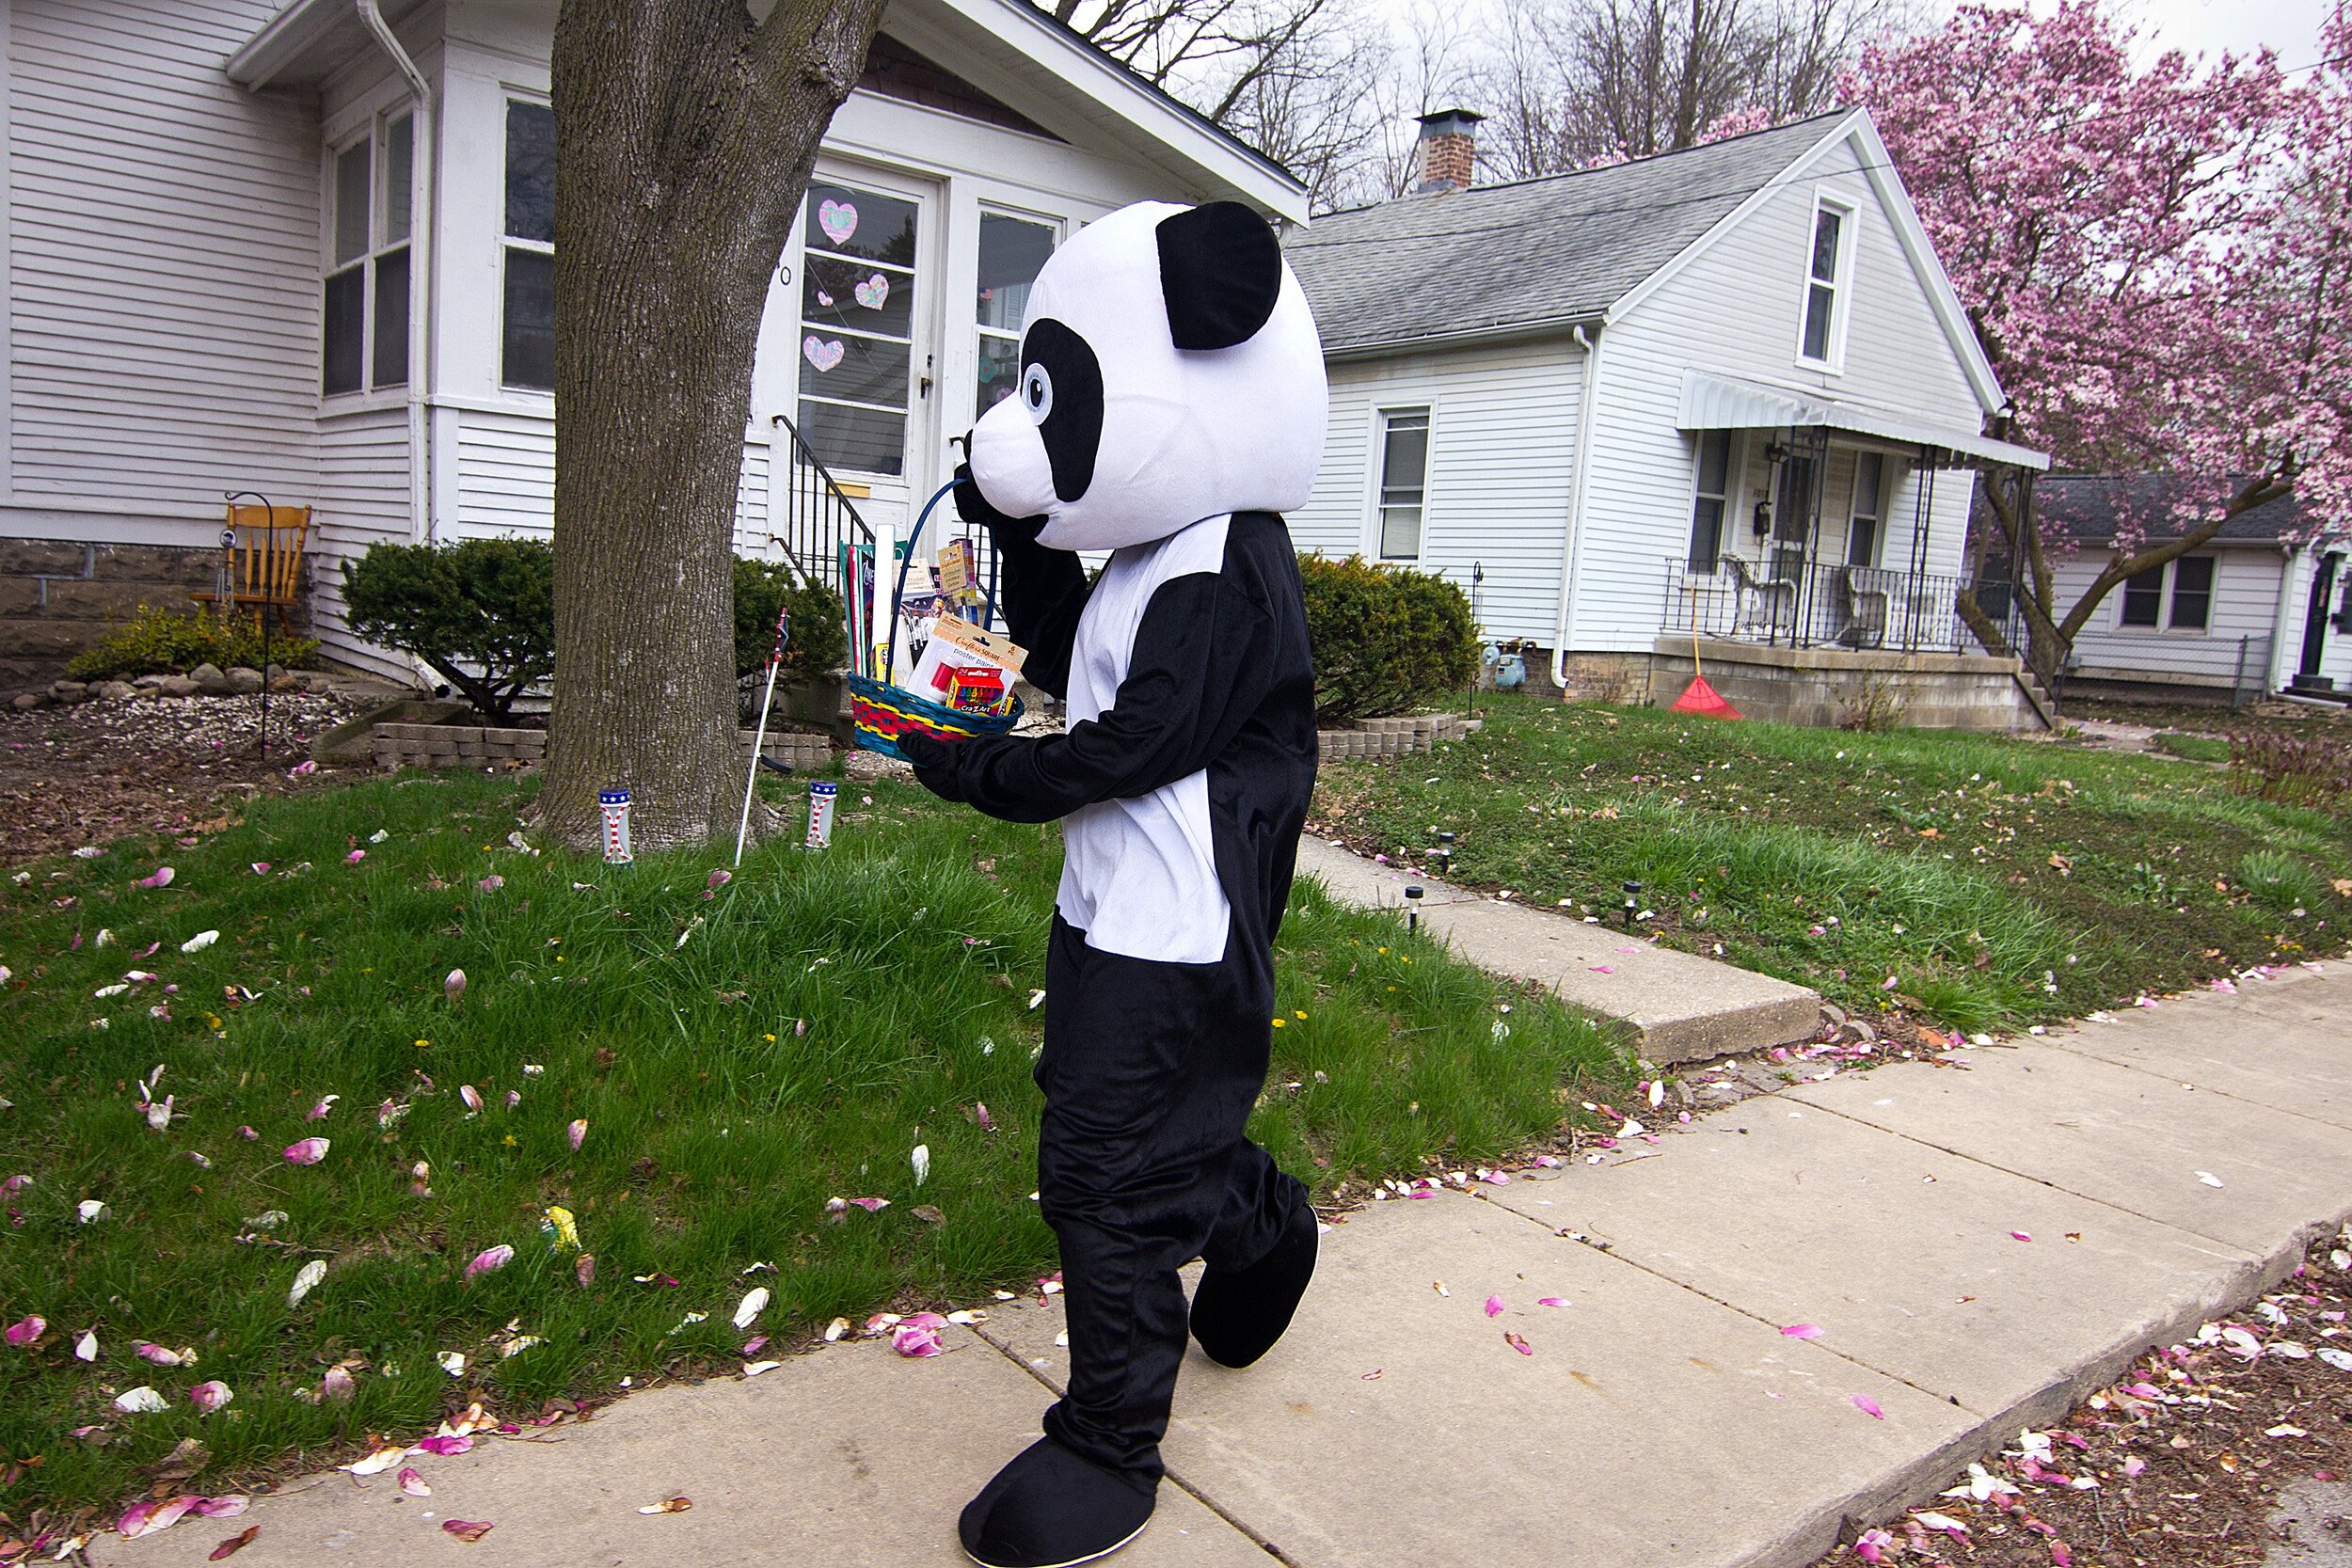  Marcie Taylor dresses as the "Compassion Panda" and brings an Easter basket of art supplies for a home Thursday, April 9, 2020, on East Front Street in Bloomington, Illinois. Taylor is the director of Compassion Center for the Arts, a nonprofit acad